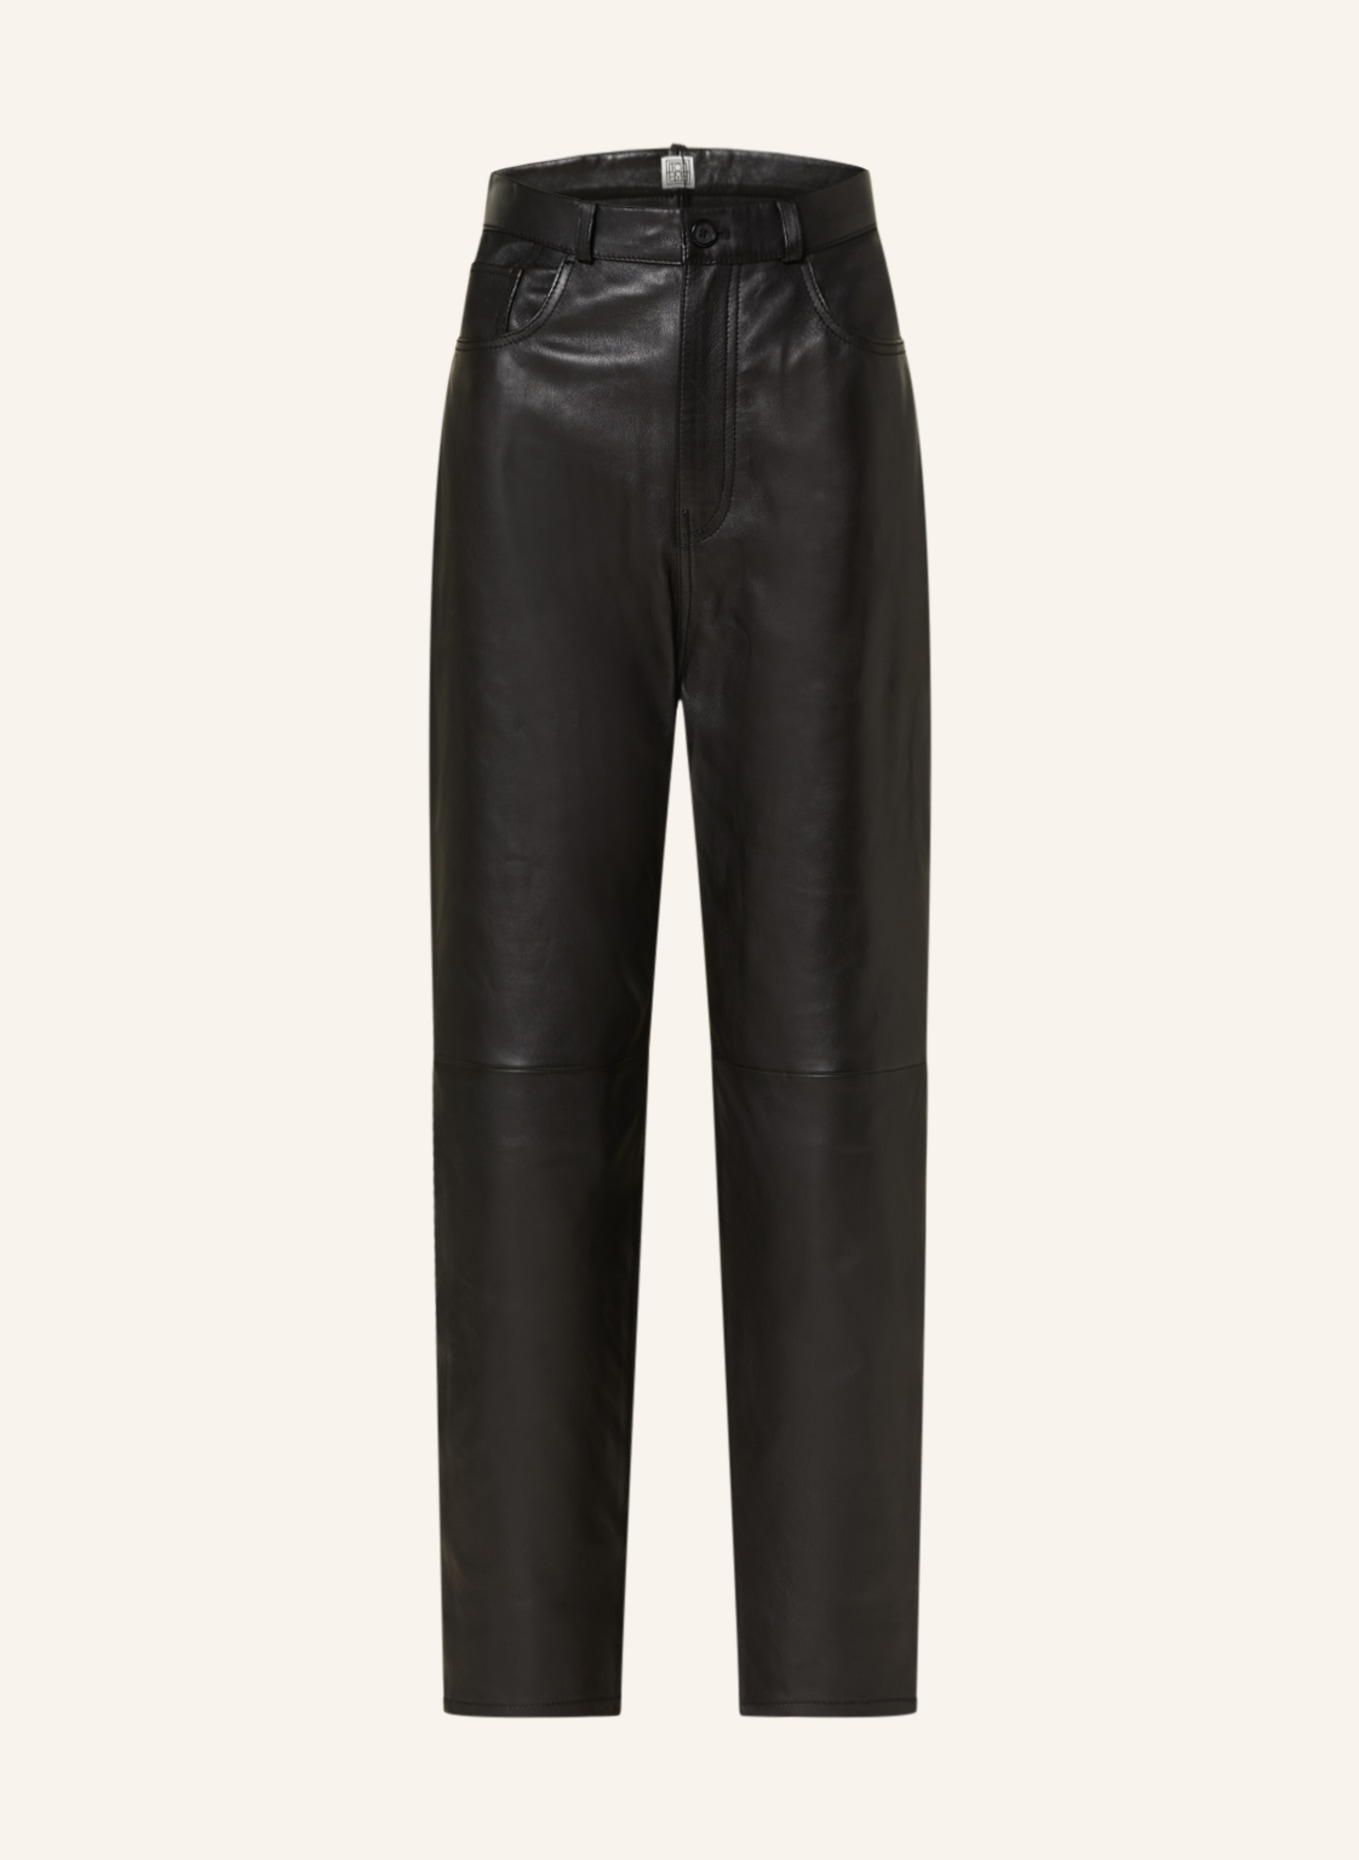 TOTEME 7/8 trousers made of leather, Color: BLACK (Image 1)